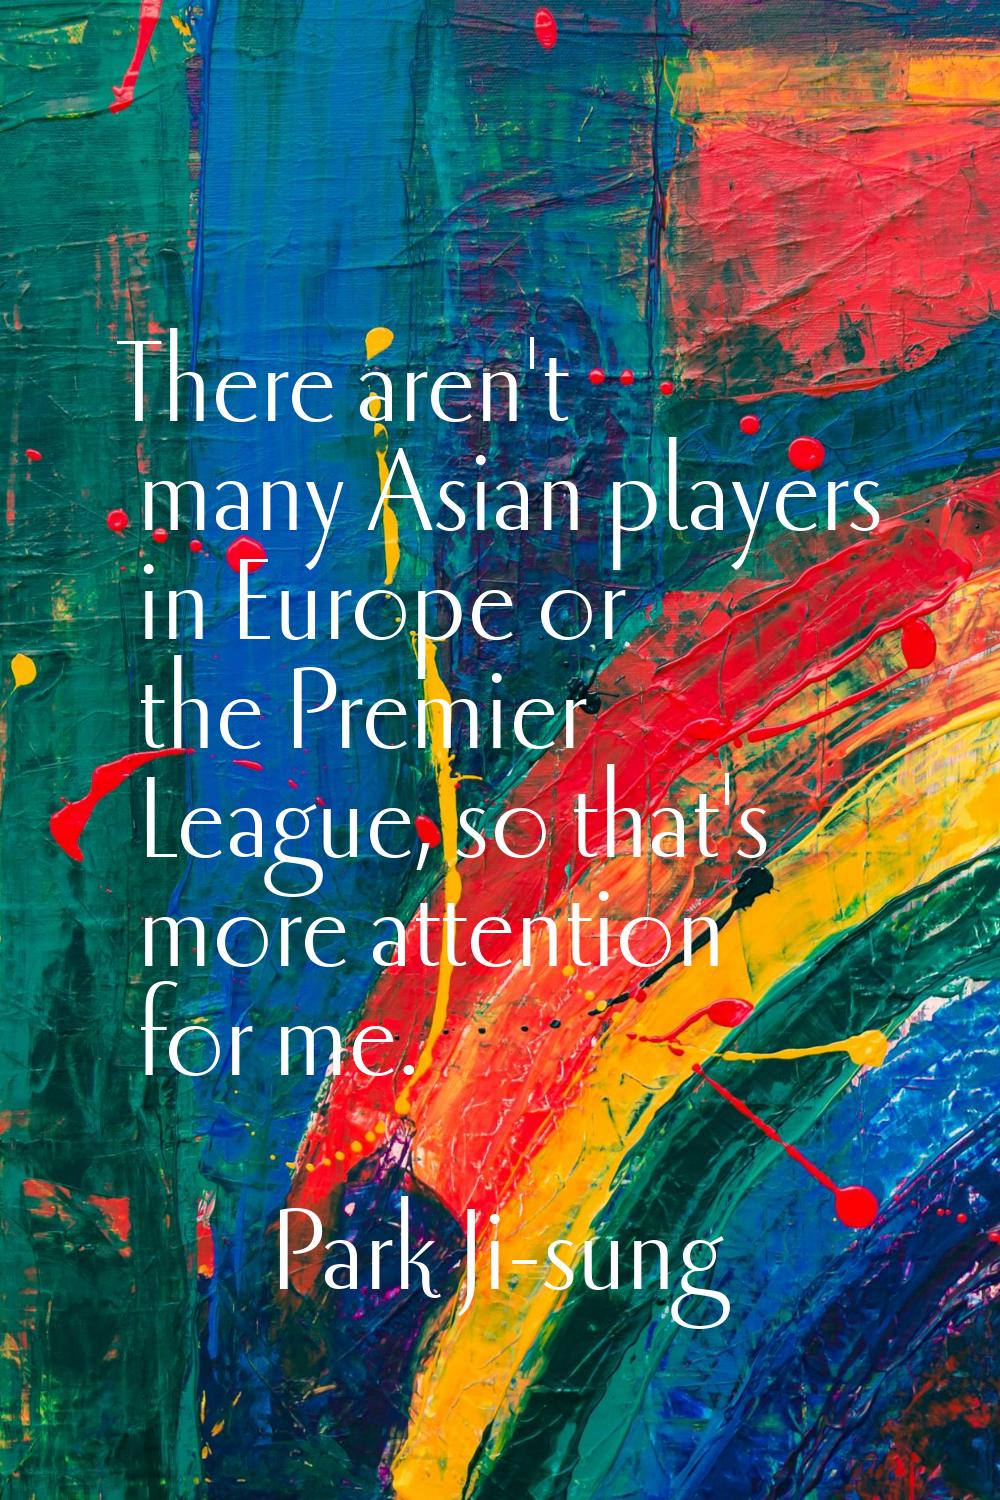 There aren't many Asian players in Europe or the Premier League, so that's more attention for me.